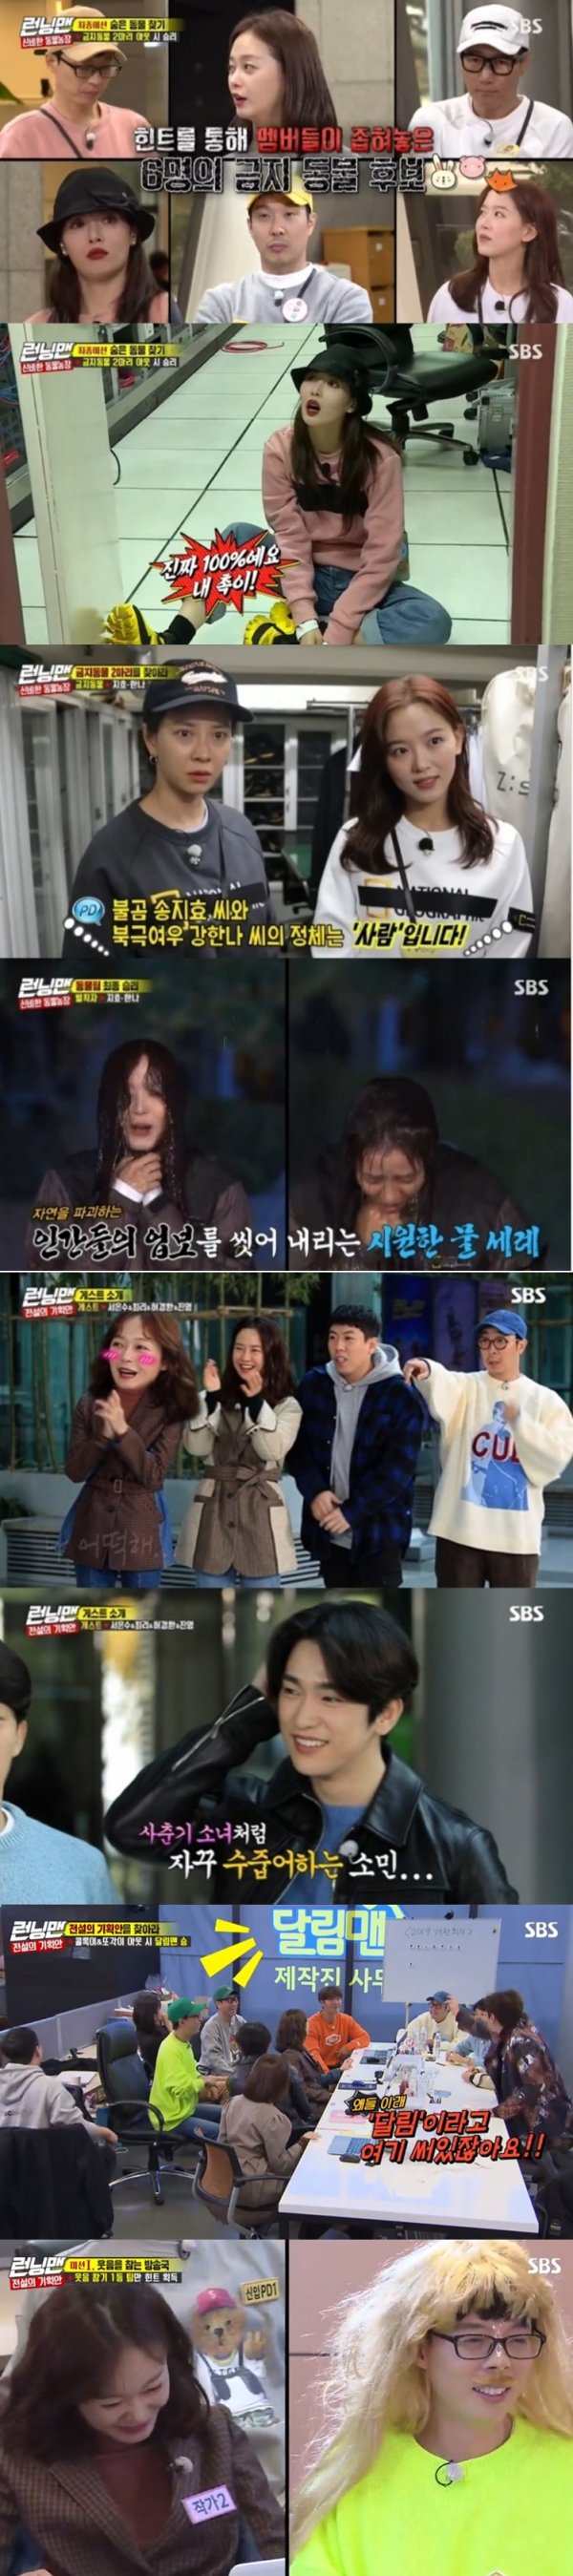 SBS Running Man is jumping to 10% of Per minute top TV viewer ratings and TV viewer ratings are on the rise.According to Nielsen Korea, a TV viewer rating research institute, Running Man, which was broadcast on the 17th, showed an increase in TV viewer ratings for the sixth consecutive week with an average TV viewer ratings of 5.4% and 2.3%.The 2049 target TV viewer ratings, which are important indicators of major advertising officials, rose by 4.8% (based on the second part of the Seoul metropolitan areas TV viewer ratings), not only to overtake the Masked Wang and the Donkey Ears, but also 1% more than last week.Per minute The best TV viewer ratings shot a whopping 10 percent.The broadcast was decorated with the final race of Mysterious Animal Farm and began to search for banned animals.If you find a forbidden animal and in-N-Out Burger, the general animal wins, but the forbidden animal was able to use the closed area.When an In-N-Out Burgered animal is created by a prohibited animal, a closed area is created and all hints in the closed area disappear, and even if the animal is inside it, the In-N-Out Burger is made.Yoo Jae-Suks performance shone in the face of everyone questioning each other.Yoo Jae-Suk found out that the forbidden animals were people, and he noticed that Kang Han-Na and Song Ji-hyo were sisters and bears who became foxes respectively.In the meantime, Kang Han-Na and Song Ji-hyo respectively targeted Hyun-ah and Everglow Shihyeon in-N-Out Burger and Yoo Jae-Suk.Yoo Jae-Suk informed members of the identity of the banned animals in an urgent situation and eventually the banned animals Kang Han-Na and Song Ji-hyo were in-N-Out Burger and received the final penalty.On the other hand, on the same day, the Legendary Plan Race, which was guested by Gods Seven Jinyoung, actors Seo Eun-soo, Choi Lee and comedian Hur Kyung-hwan, was also released.Jeon So-min welcomed Jinyoung by revealing his excitement, but he gave a big smile with unexpected sweat.Since then, members have been divided into PD, writers, and new PD teams of the Ralim Man program and have begun to search for Kolok Lee and the other, which is reported as a ghost story of the broadcaster.The first mission was to find a laugh. You have to put up with laughter under any circumstances, and if you laugh, you have to carry out a dressing penalty.In the midst of a fierce laughter confrontation, a questionable tool uncle appeared in front of the members.Everyone was nervous about the powerful laugh alarm and this scene took the best one minute with 10% of Per minute top TV viewer ratings.Next weeks broadcast will be released with the identity of Kolocki and the other.